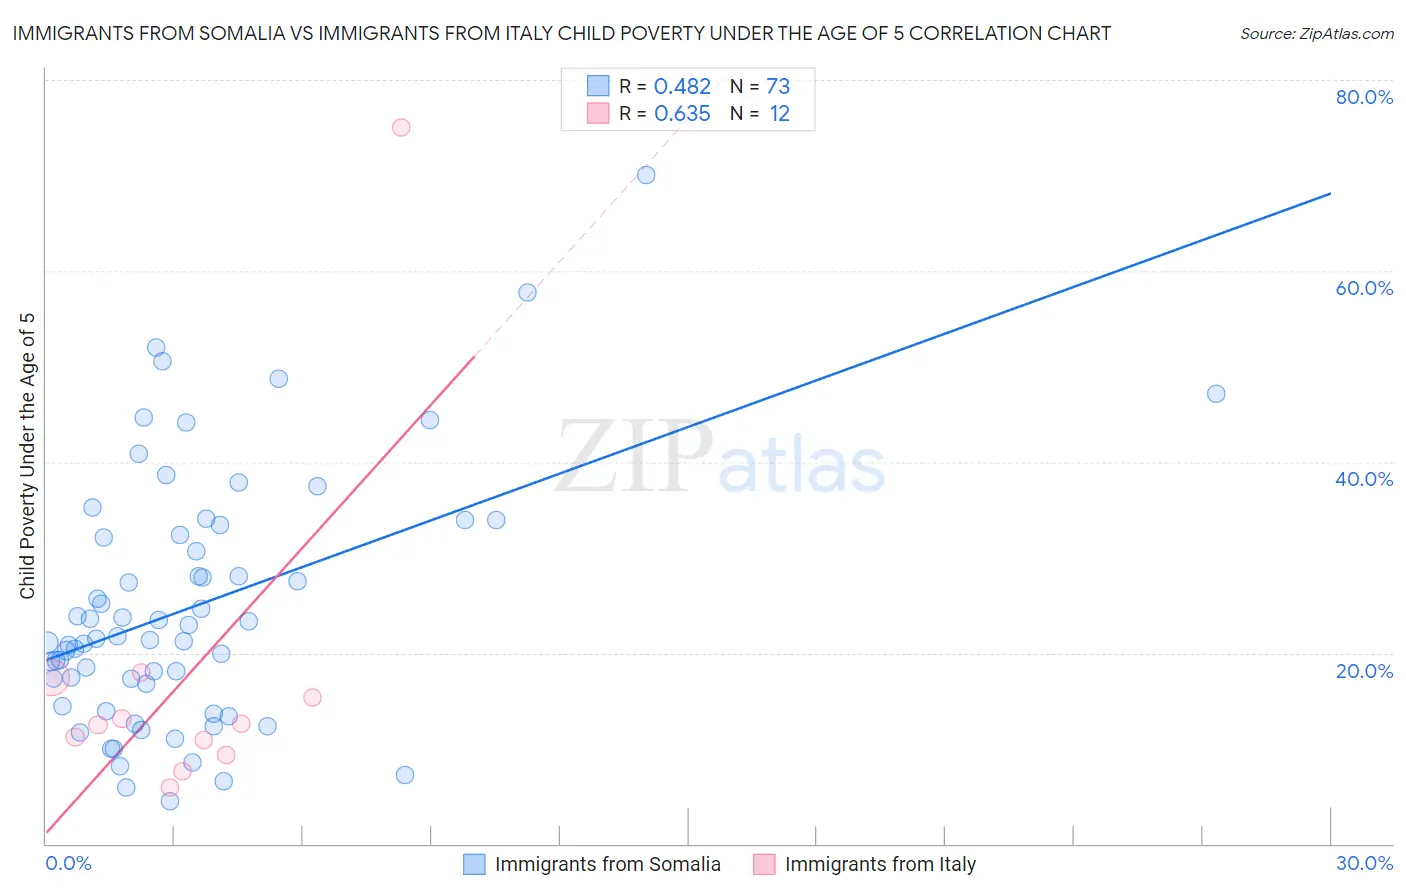 Immigrants from Somalia vs Immigrants from Italy Child Poverty Under the Age of 5